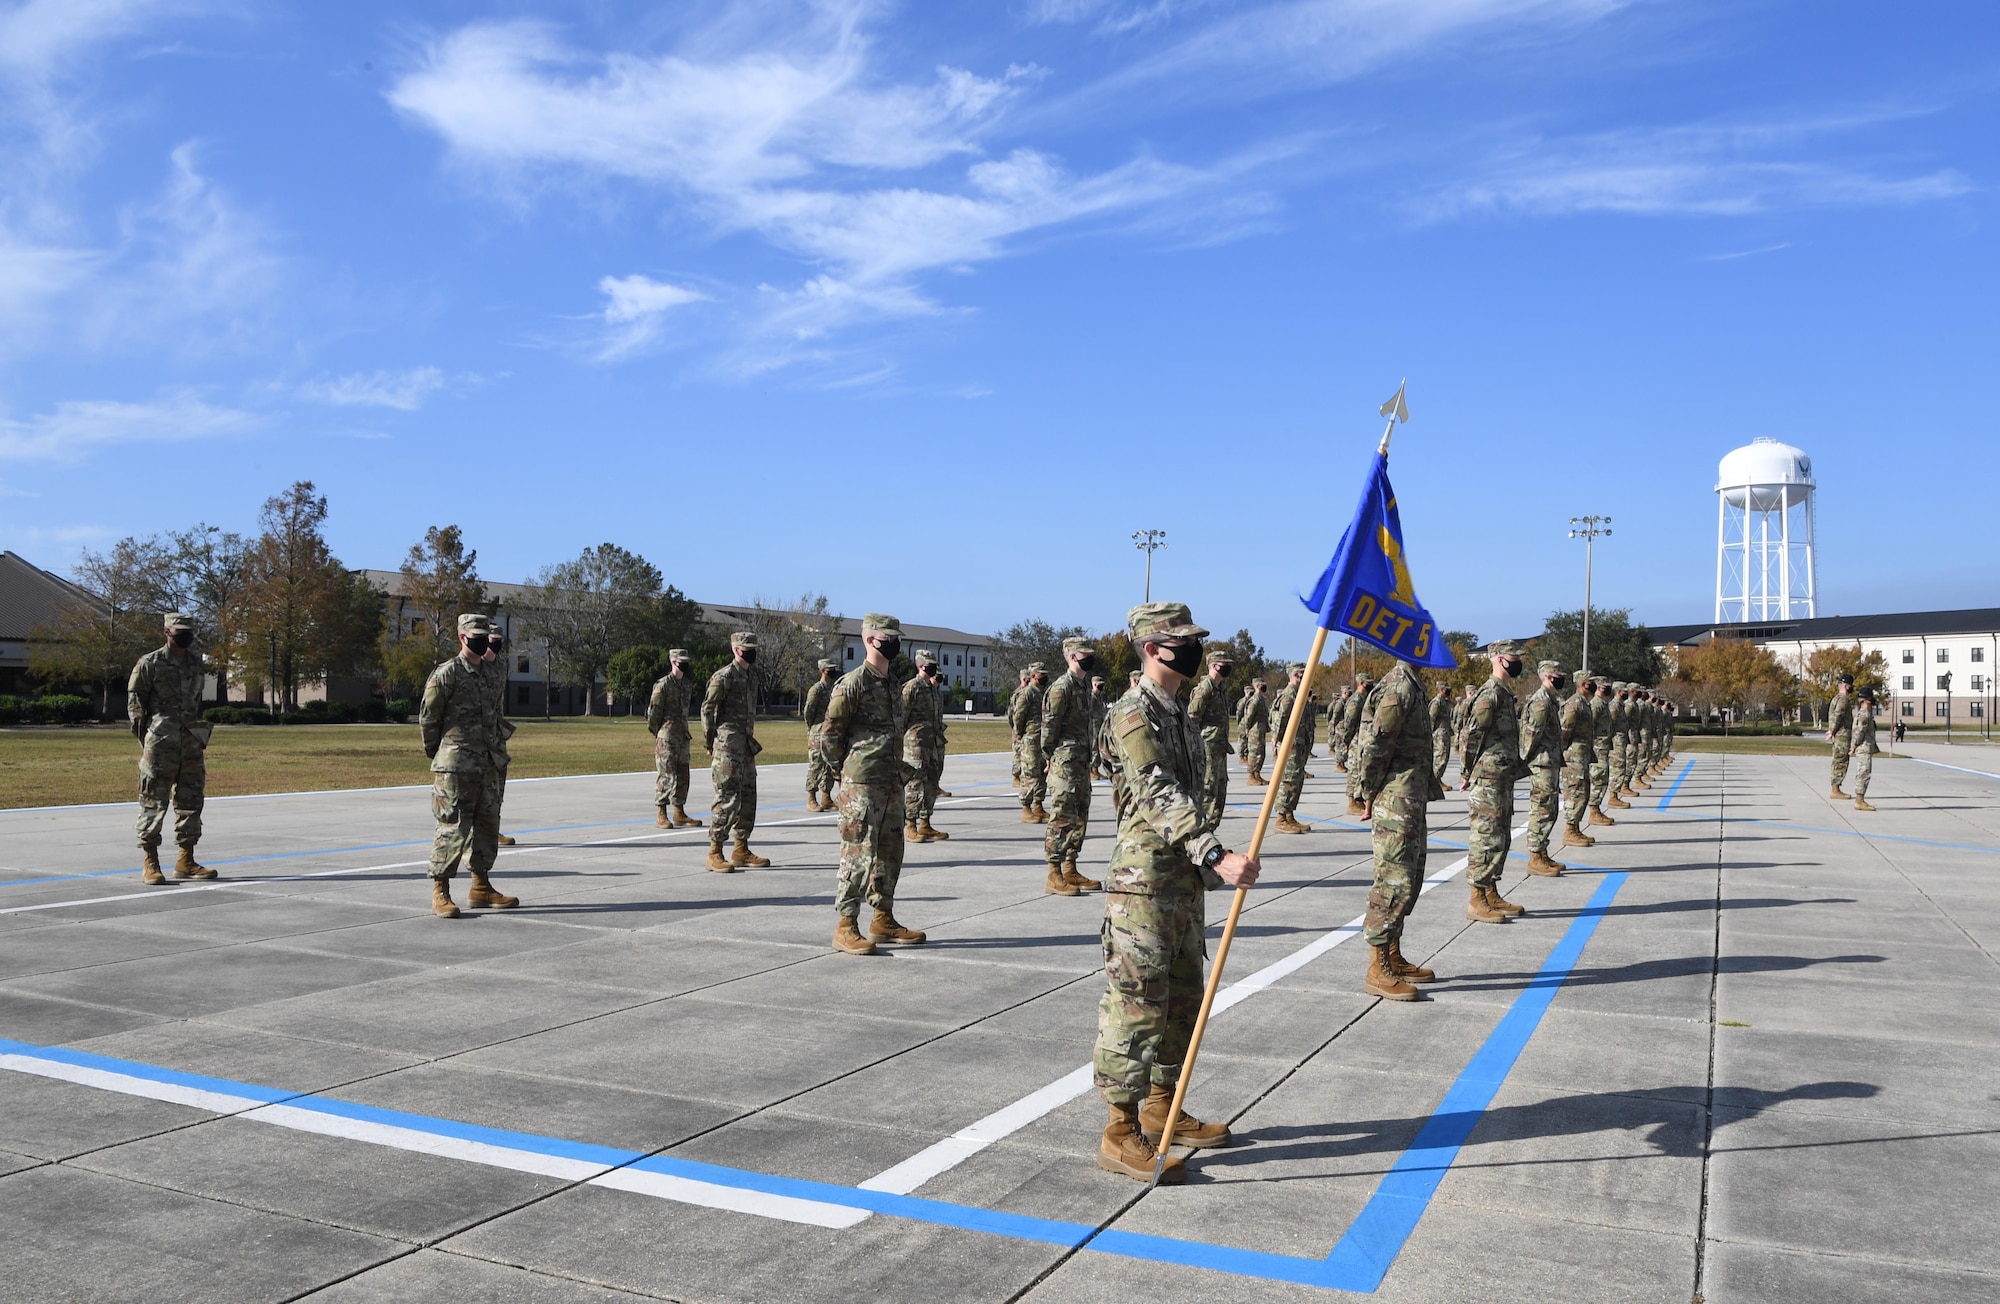 Graduating basic military training trainees stand in formation on the Levitow Training Support Facility drill pad during the final BMT graduation ceremony at Keesler Air Force Base, Mississippi, Nov. 6, 2020. Nearly 60 trainees from the 37th Training Wing Detachment 5 completed the six-week BMT course. Throughout the duration of BMT training at Keesler, 18 flights and 939 Airmen graduated. (U.S. Air Force photo by Kemberly Groue)